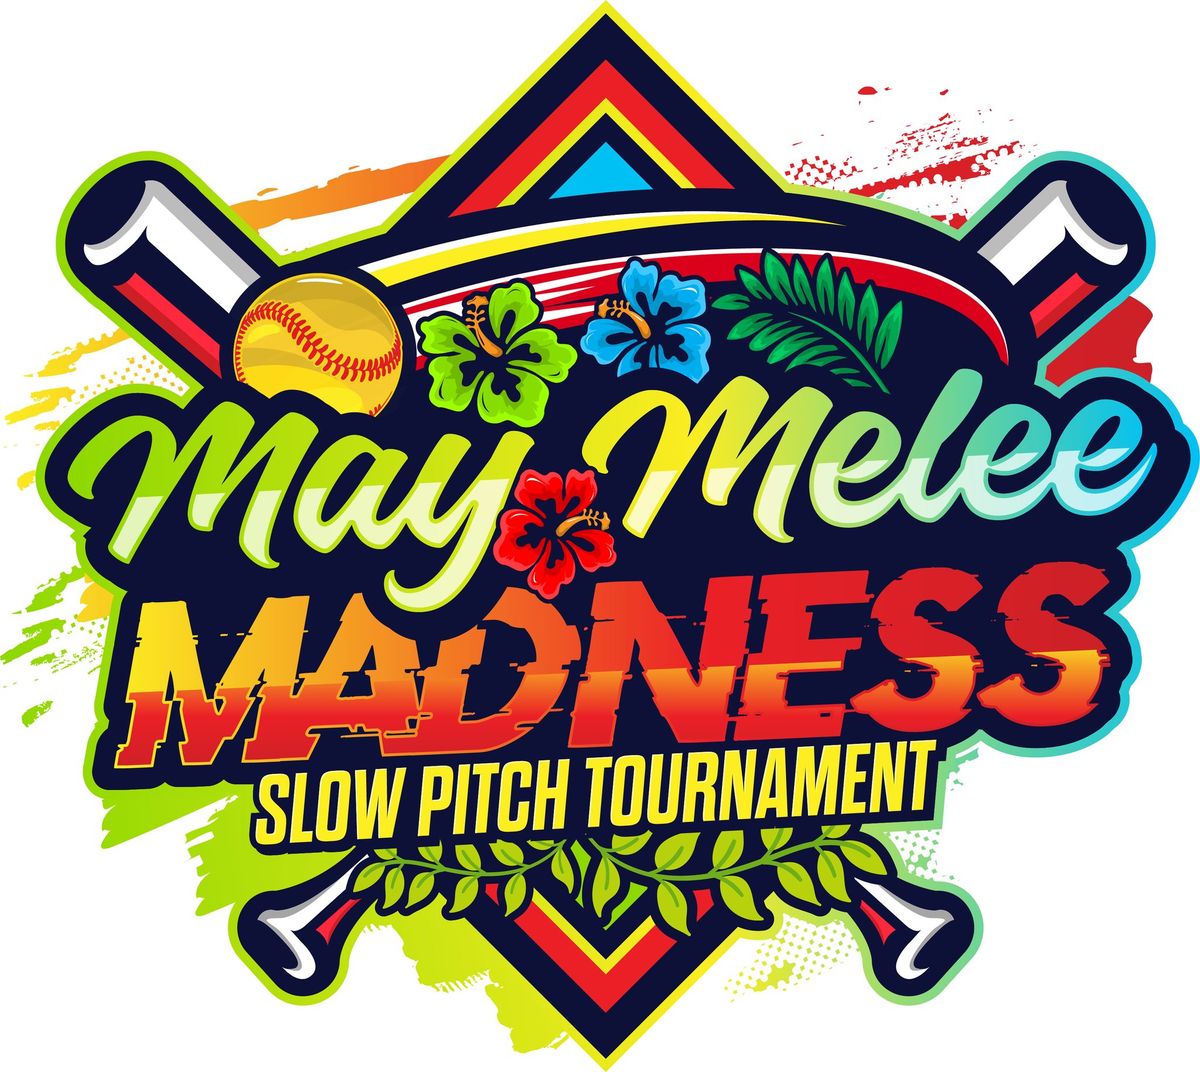 May Melee Madness Slow Pitch Tournament